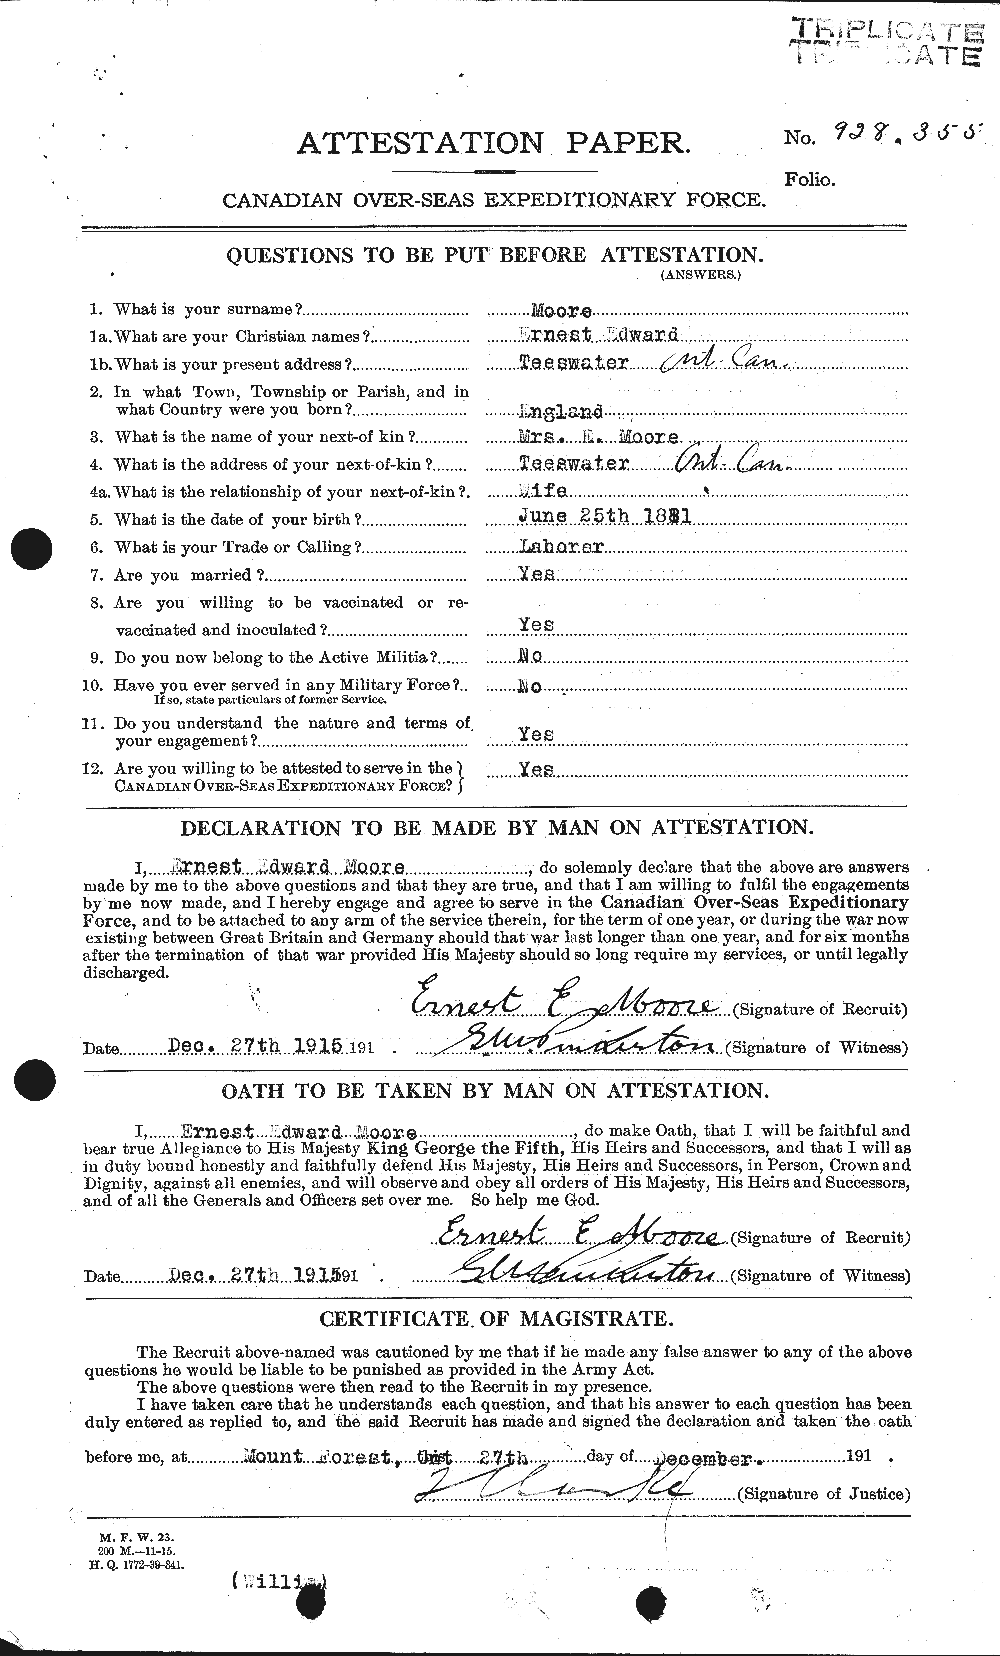 Personnel Records of the First World War - CEF 506665a